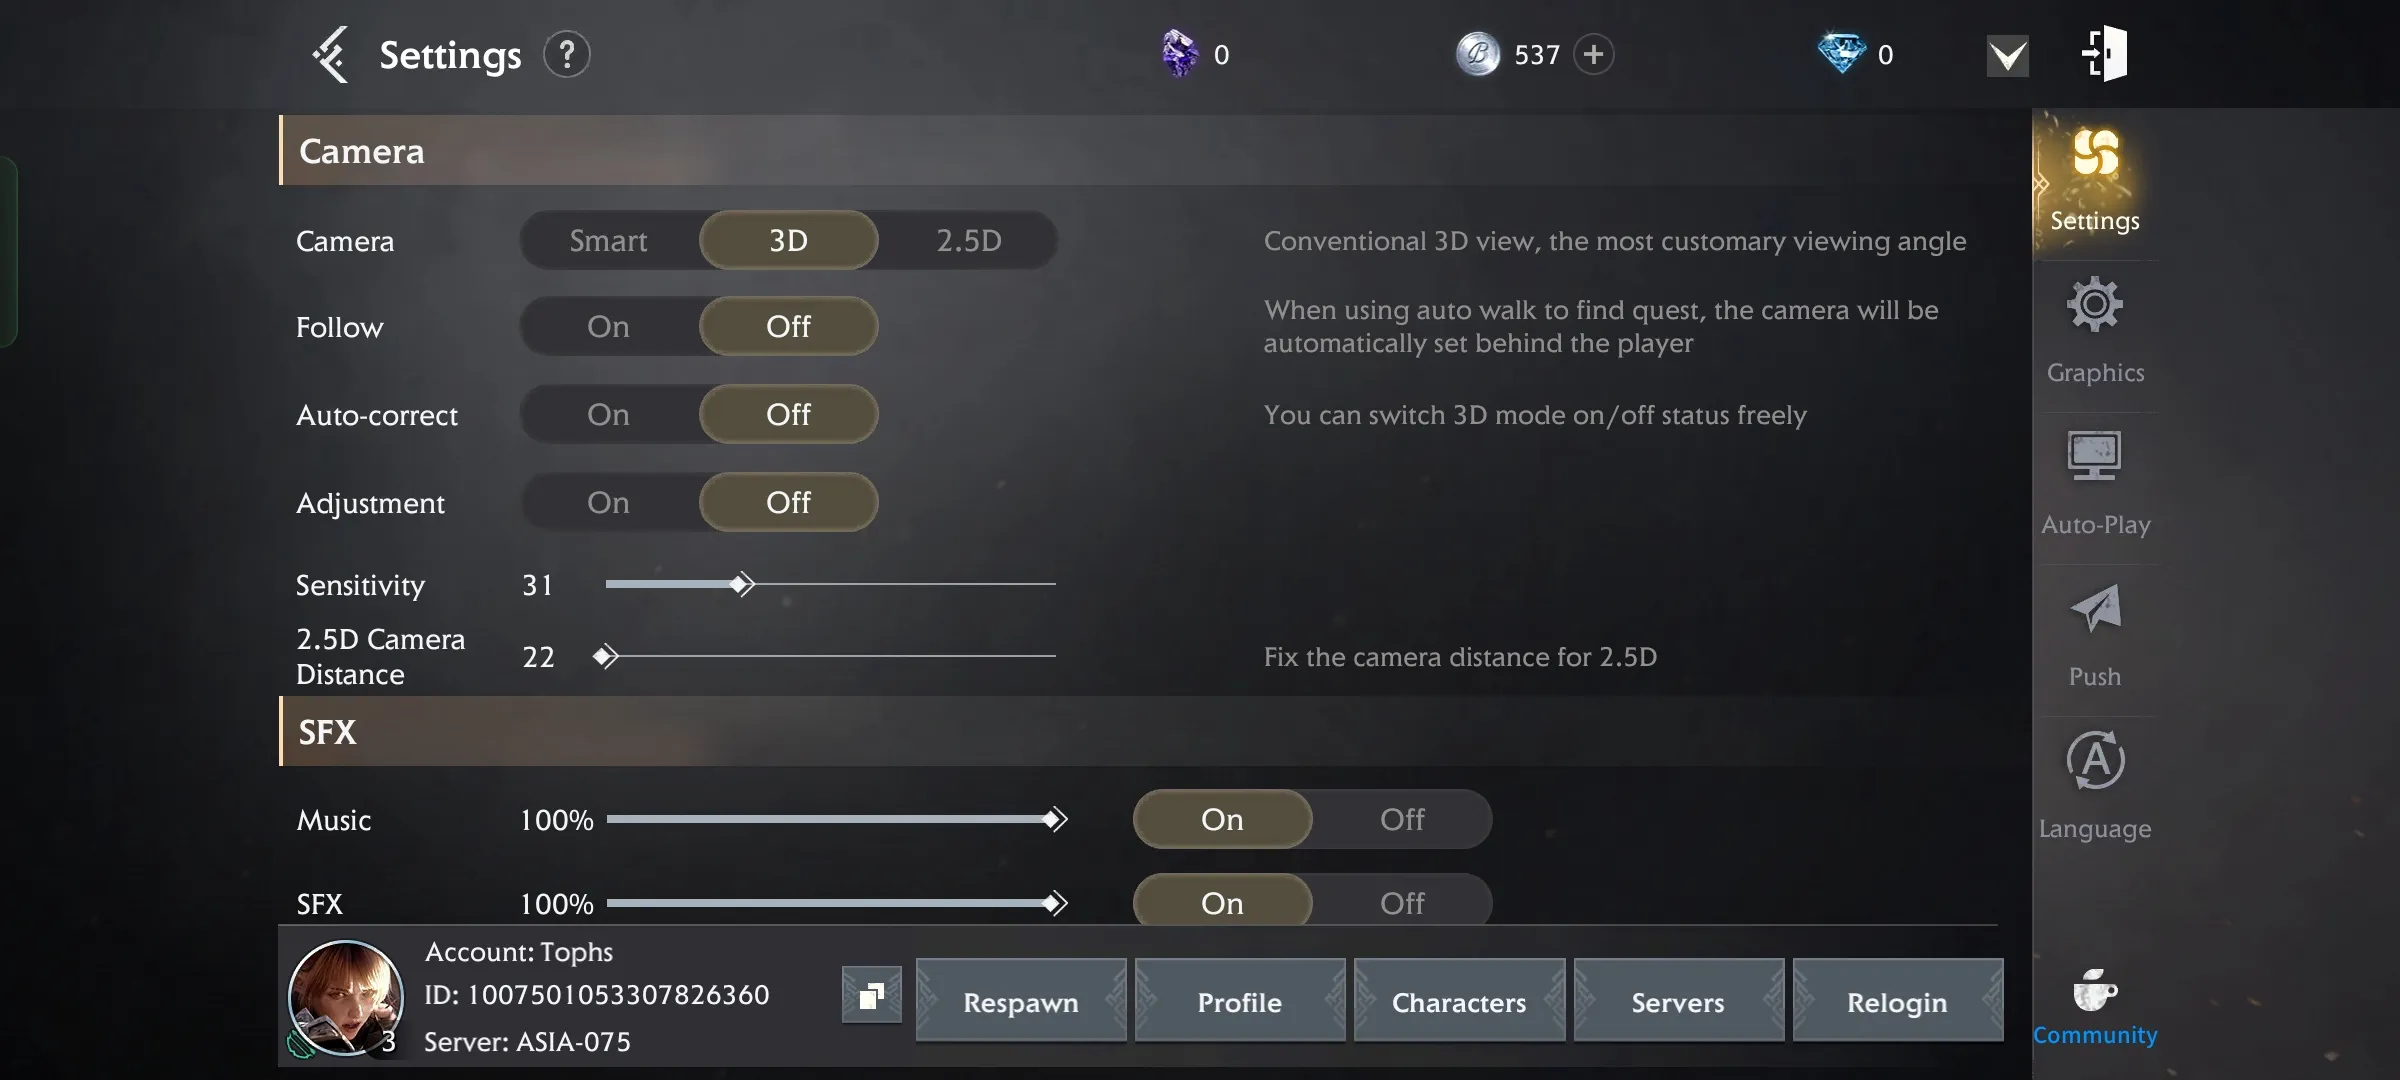 The image shows the settings in Bless Global, providing players with the ability to explore and customize various options to optimize their gaming experience.